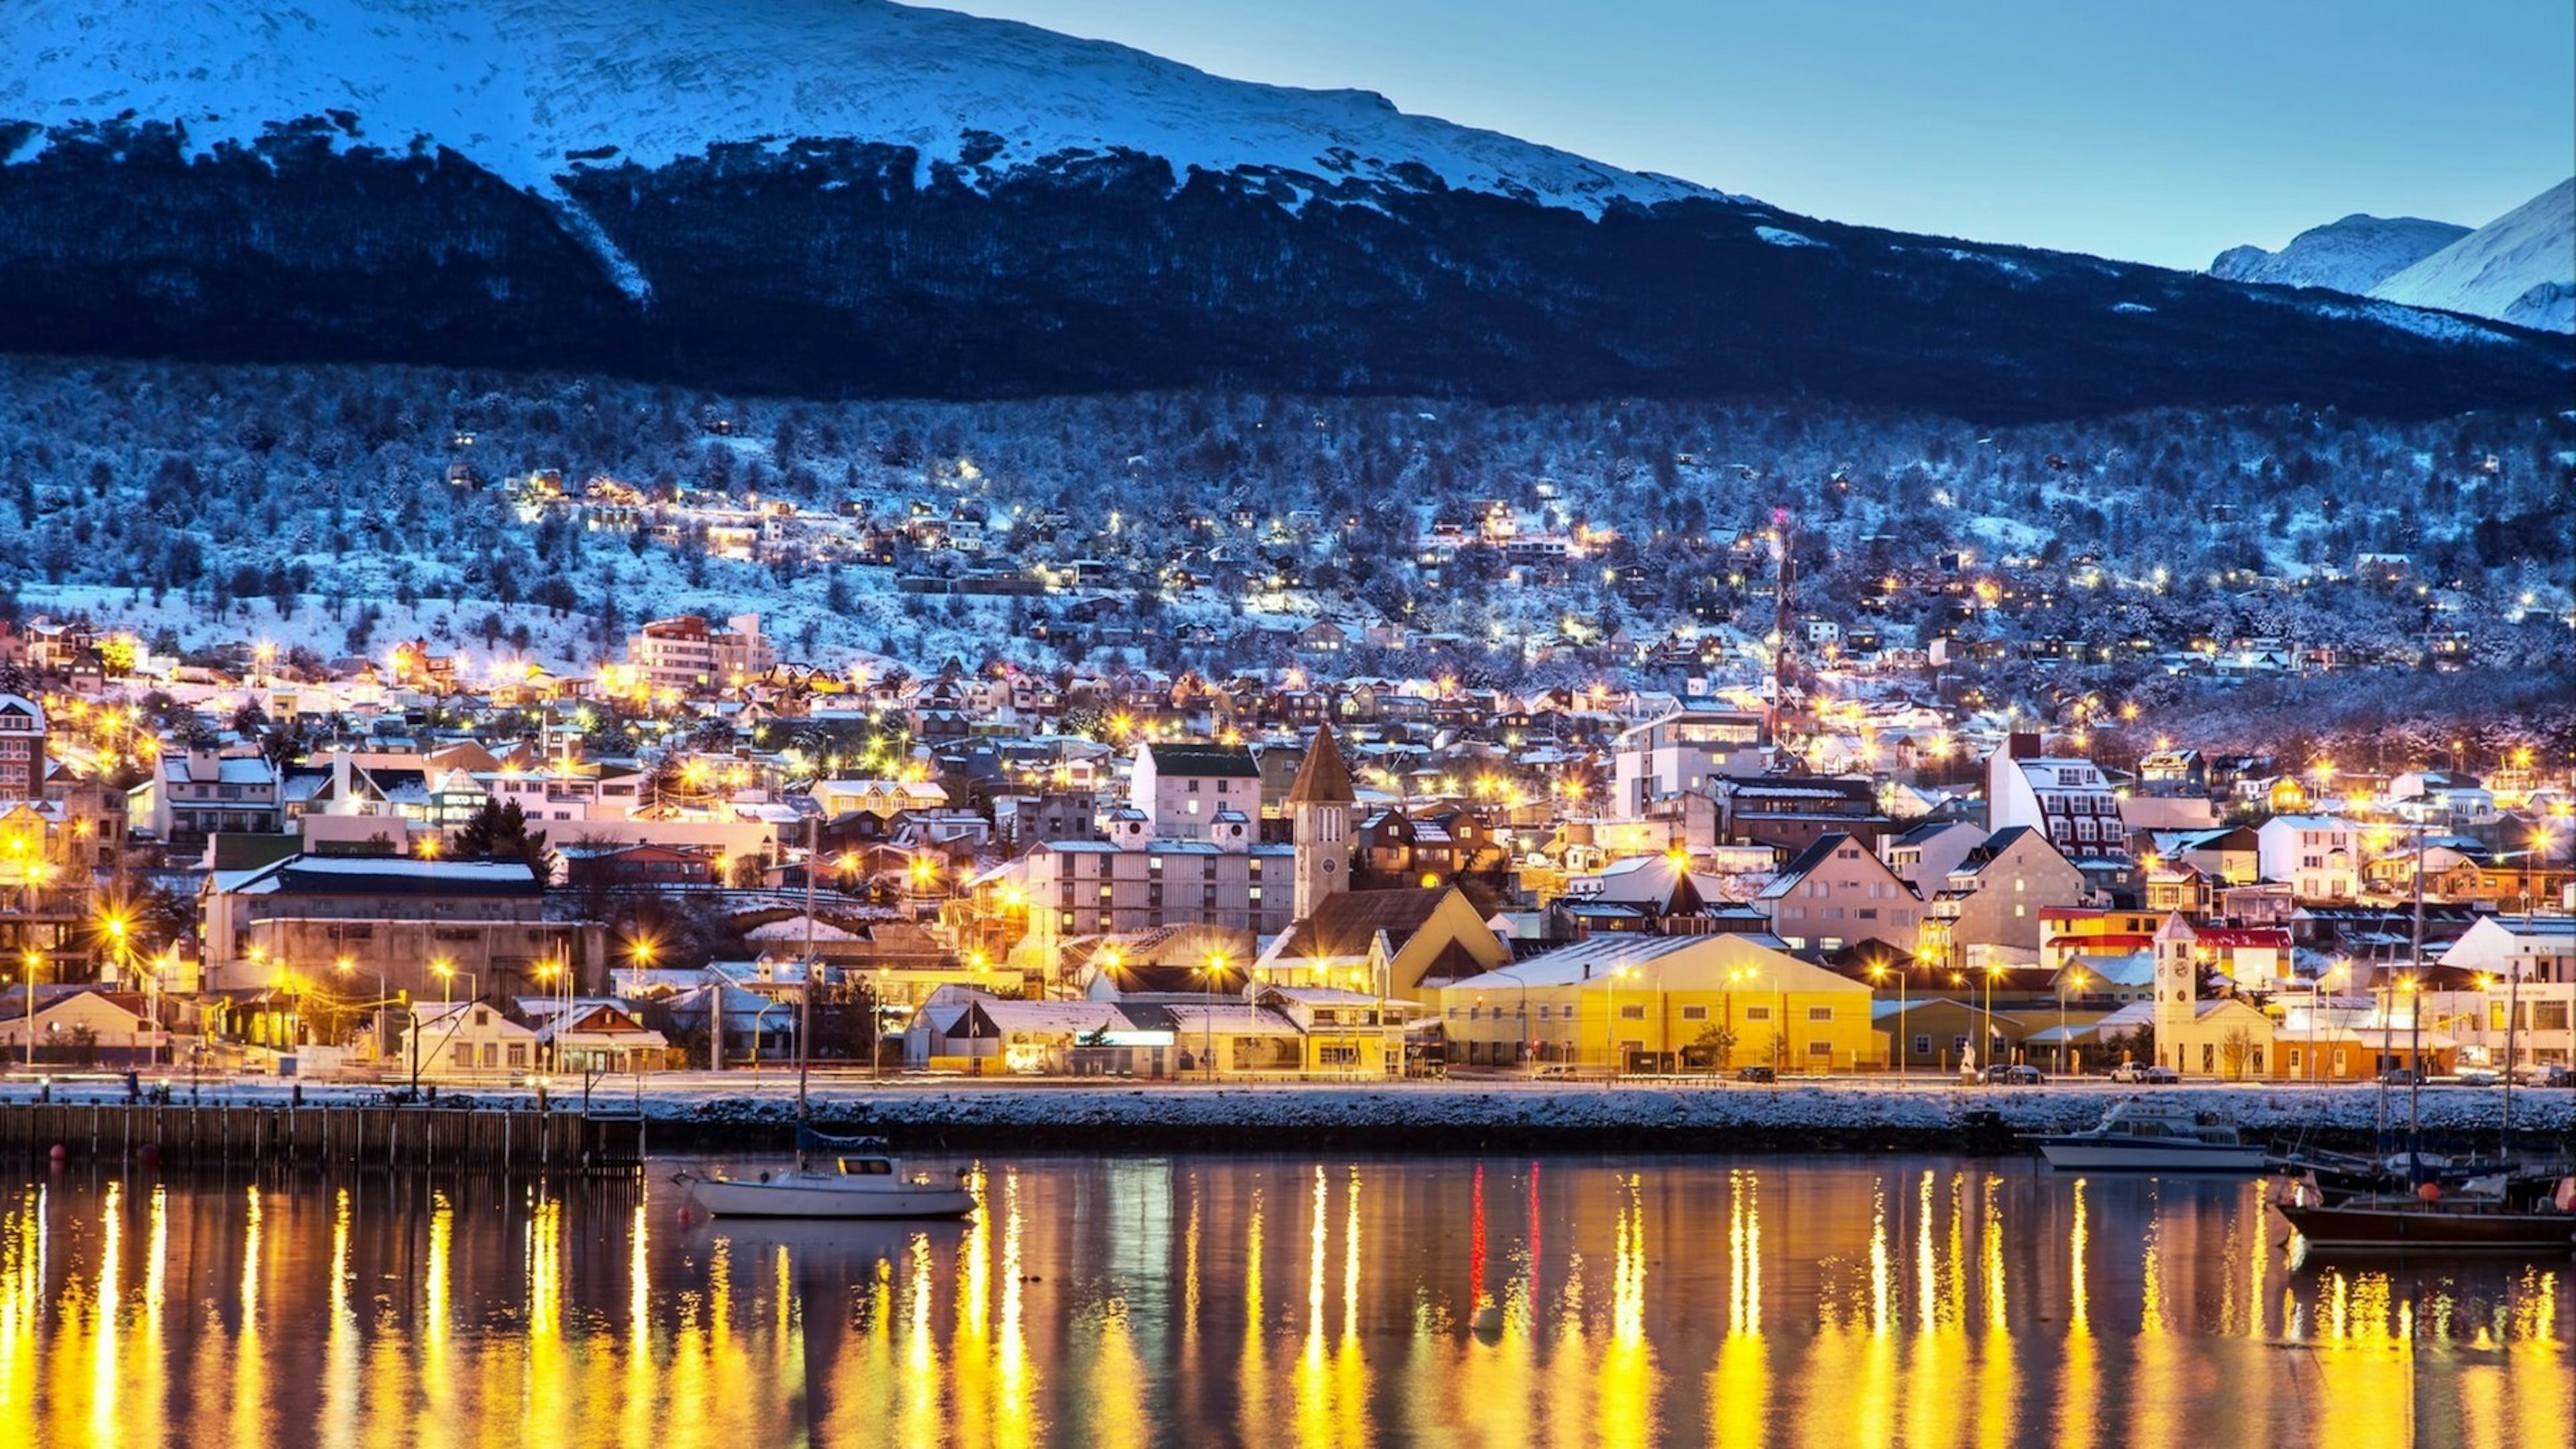 Ushuaia city in the late afternoon night